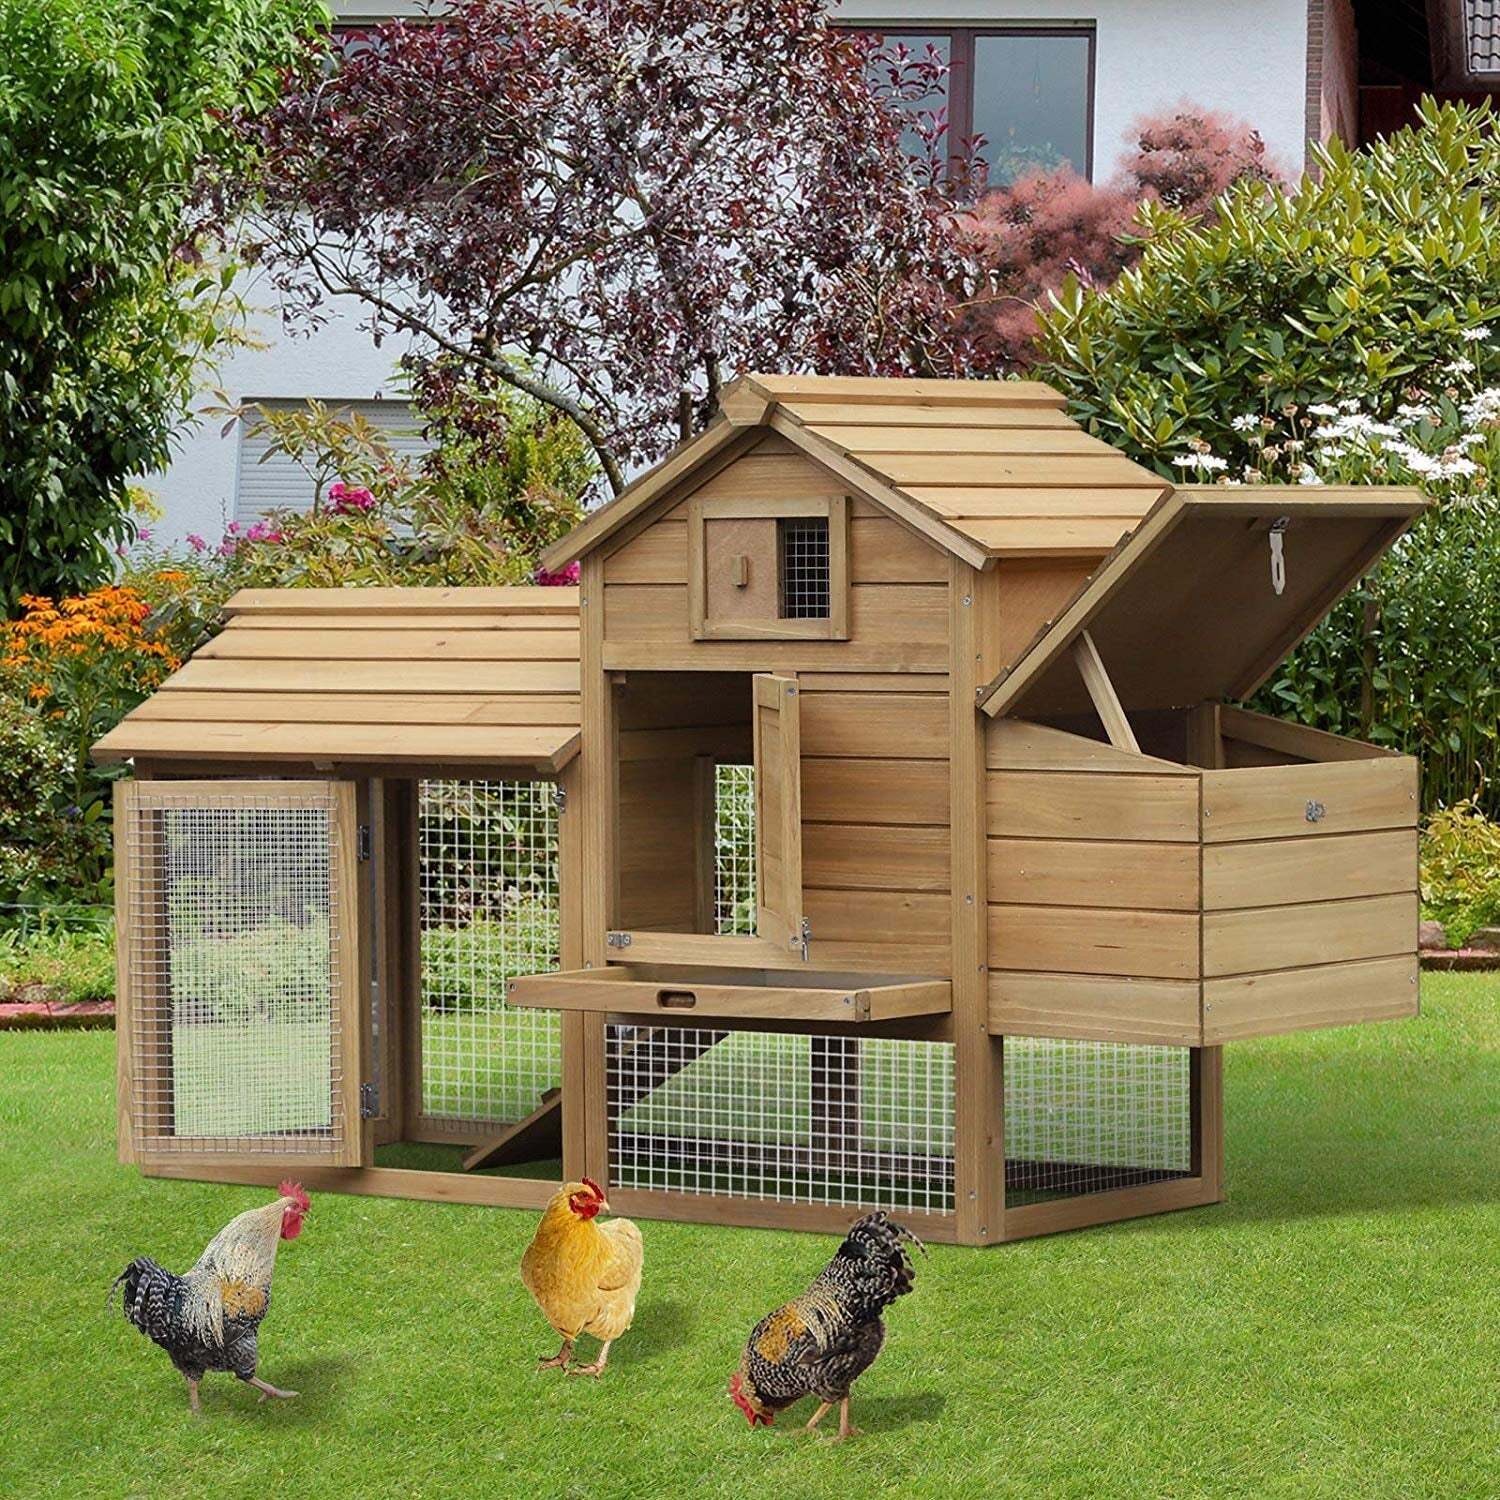 Chicken Coop Kits With Covered Run and Tray